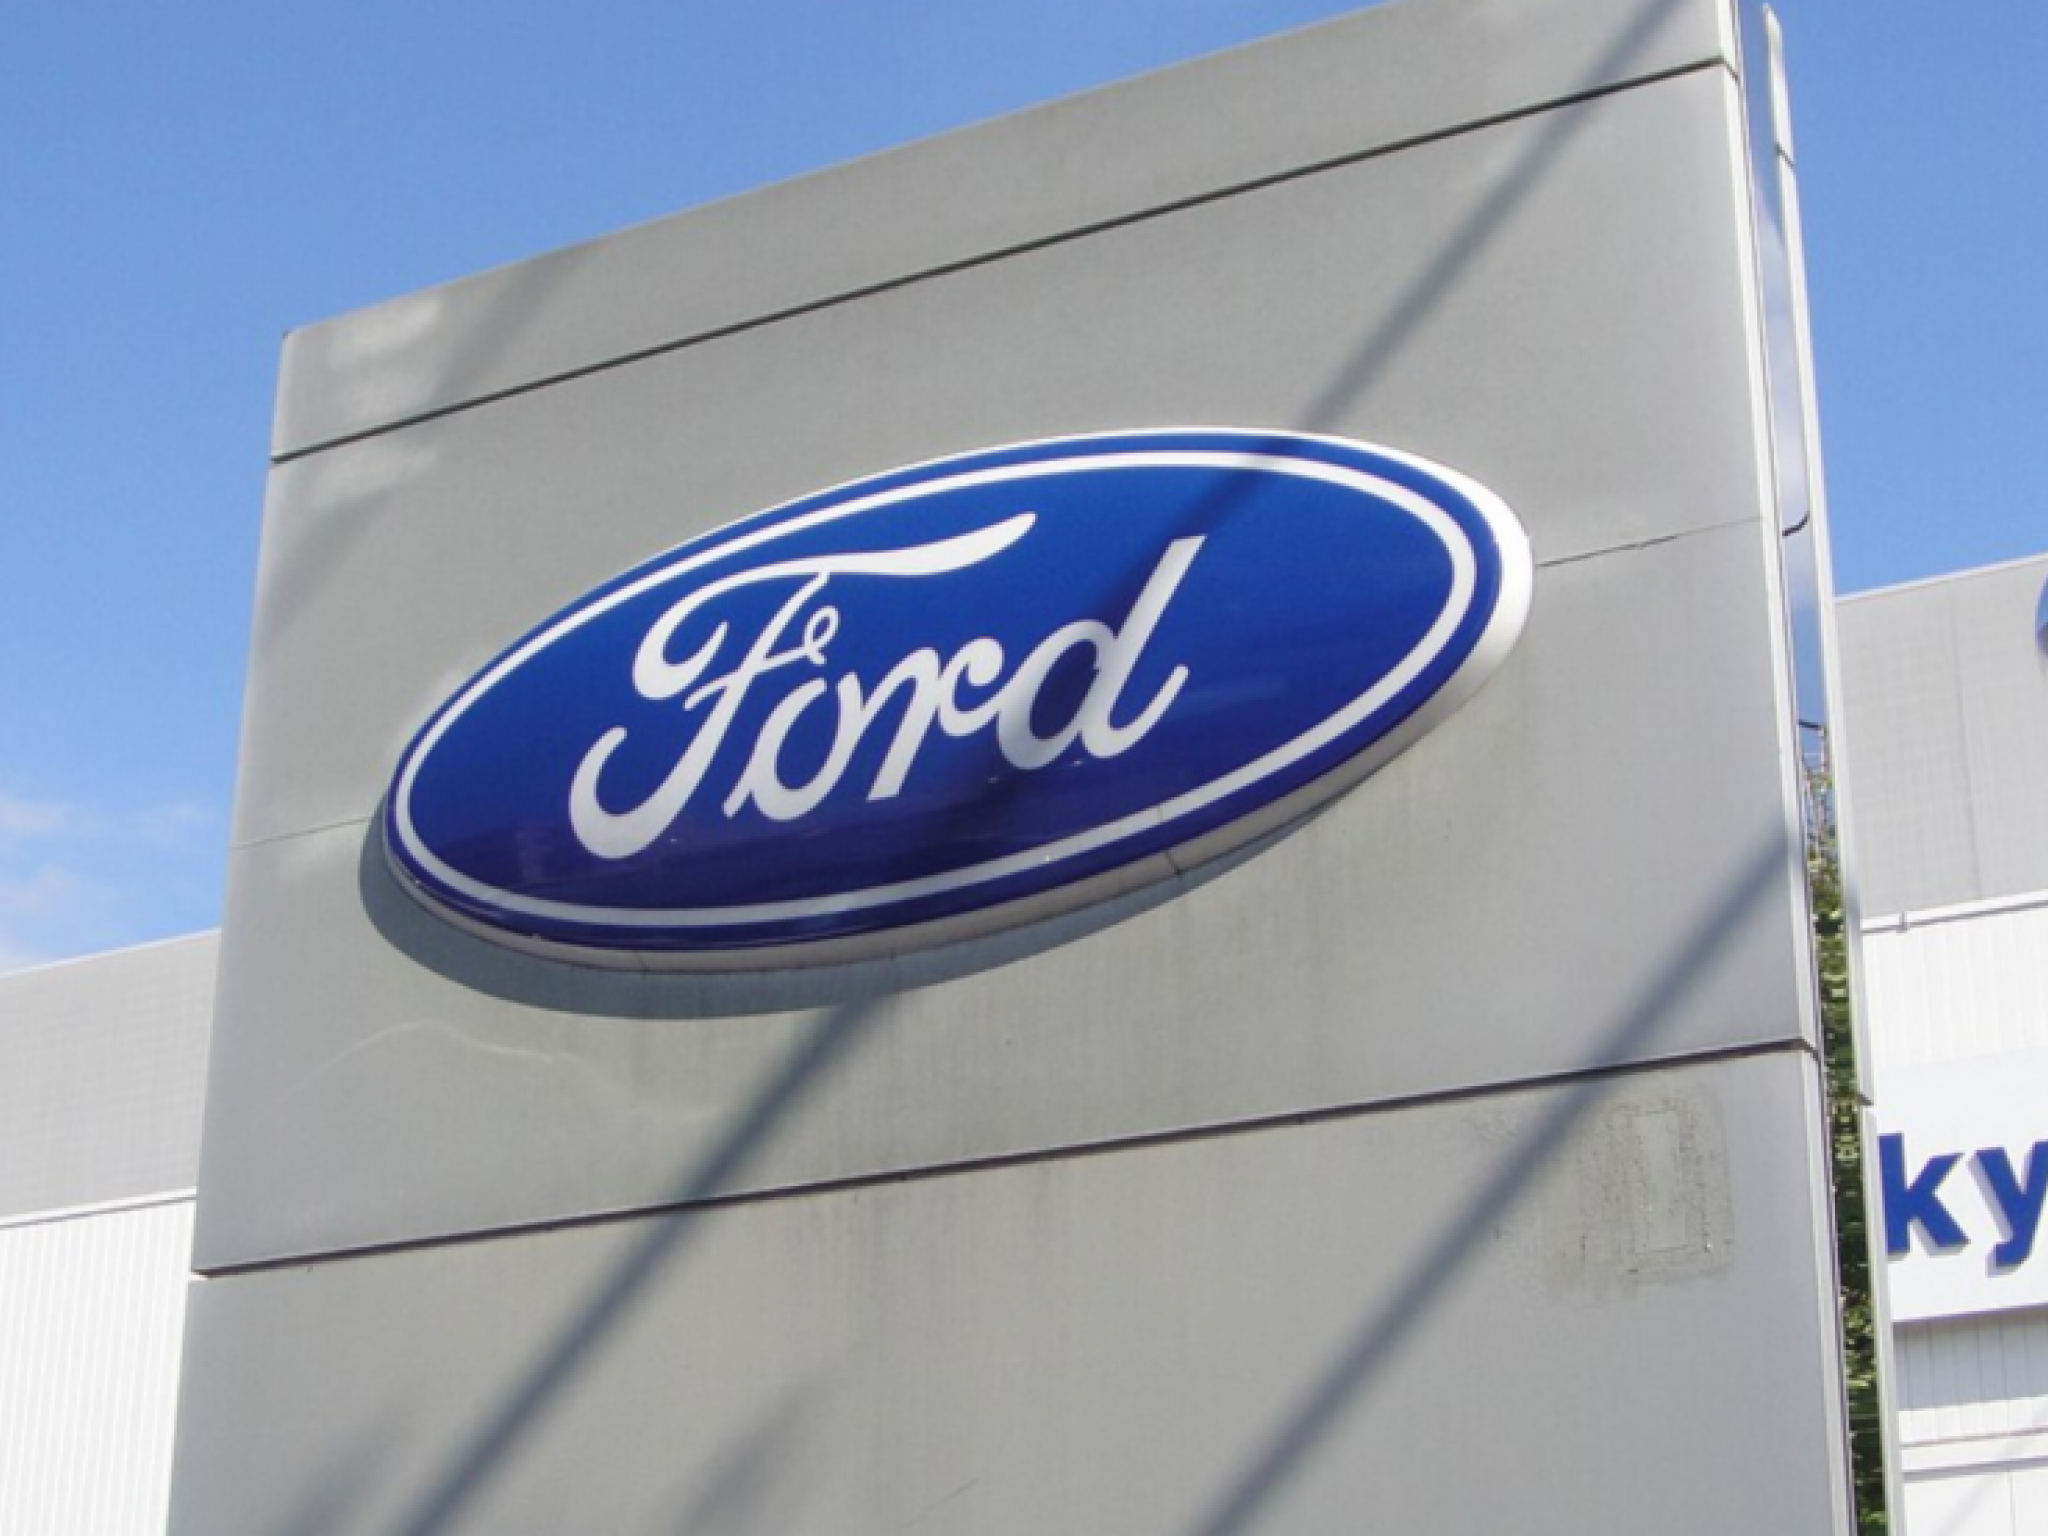  ford-posts-downbeat-earnings-joins-maxlinear-stmicroelectronics-and-other-big-stocks-moving-lower-in-thursdays-pre-market-session 